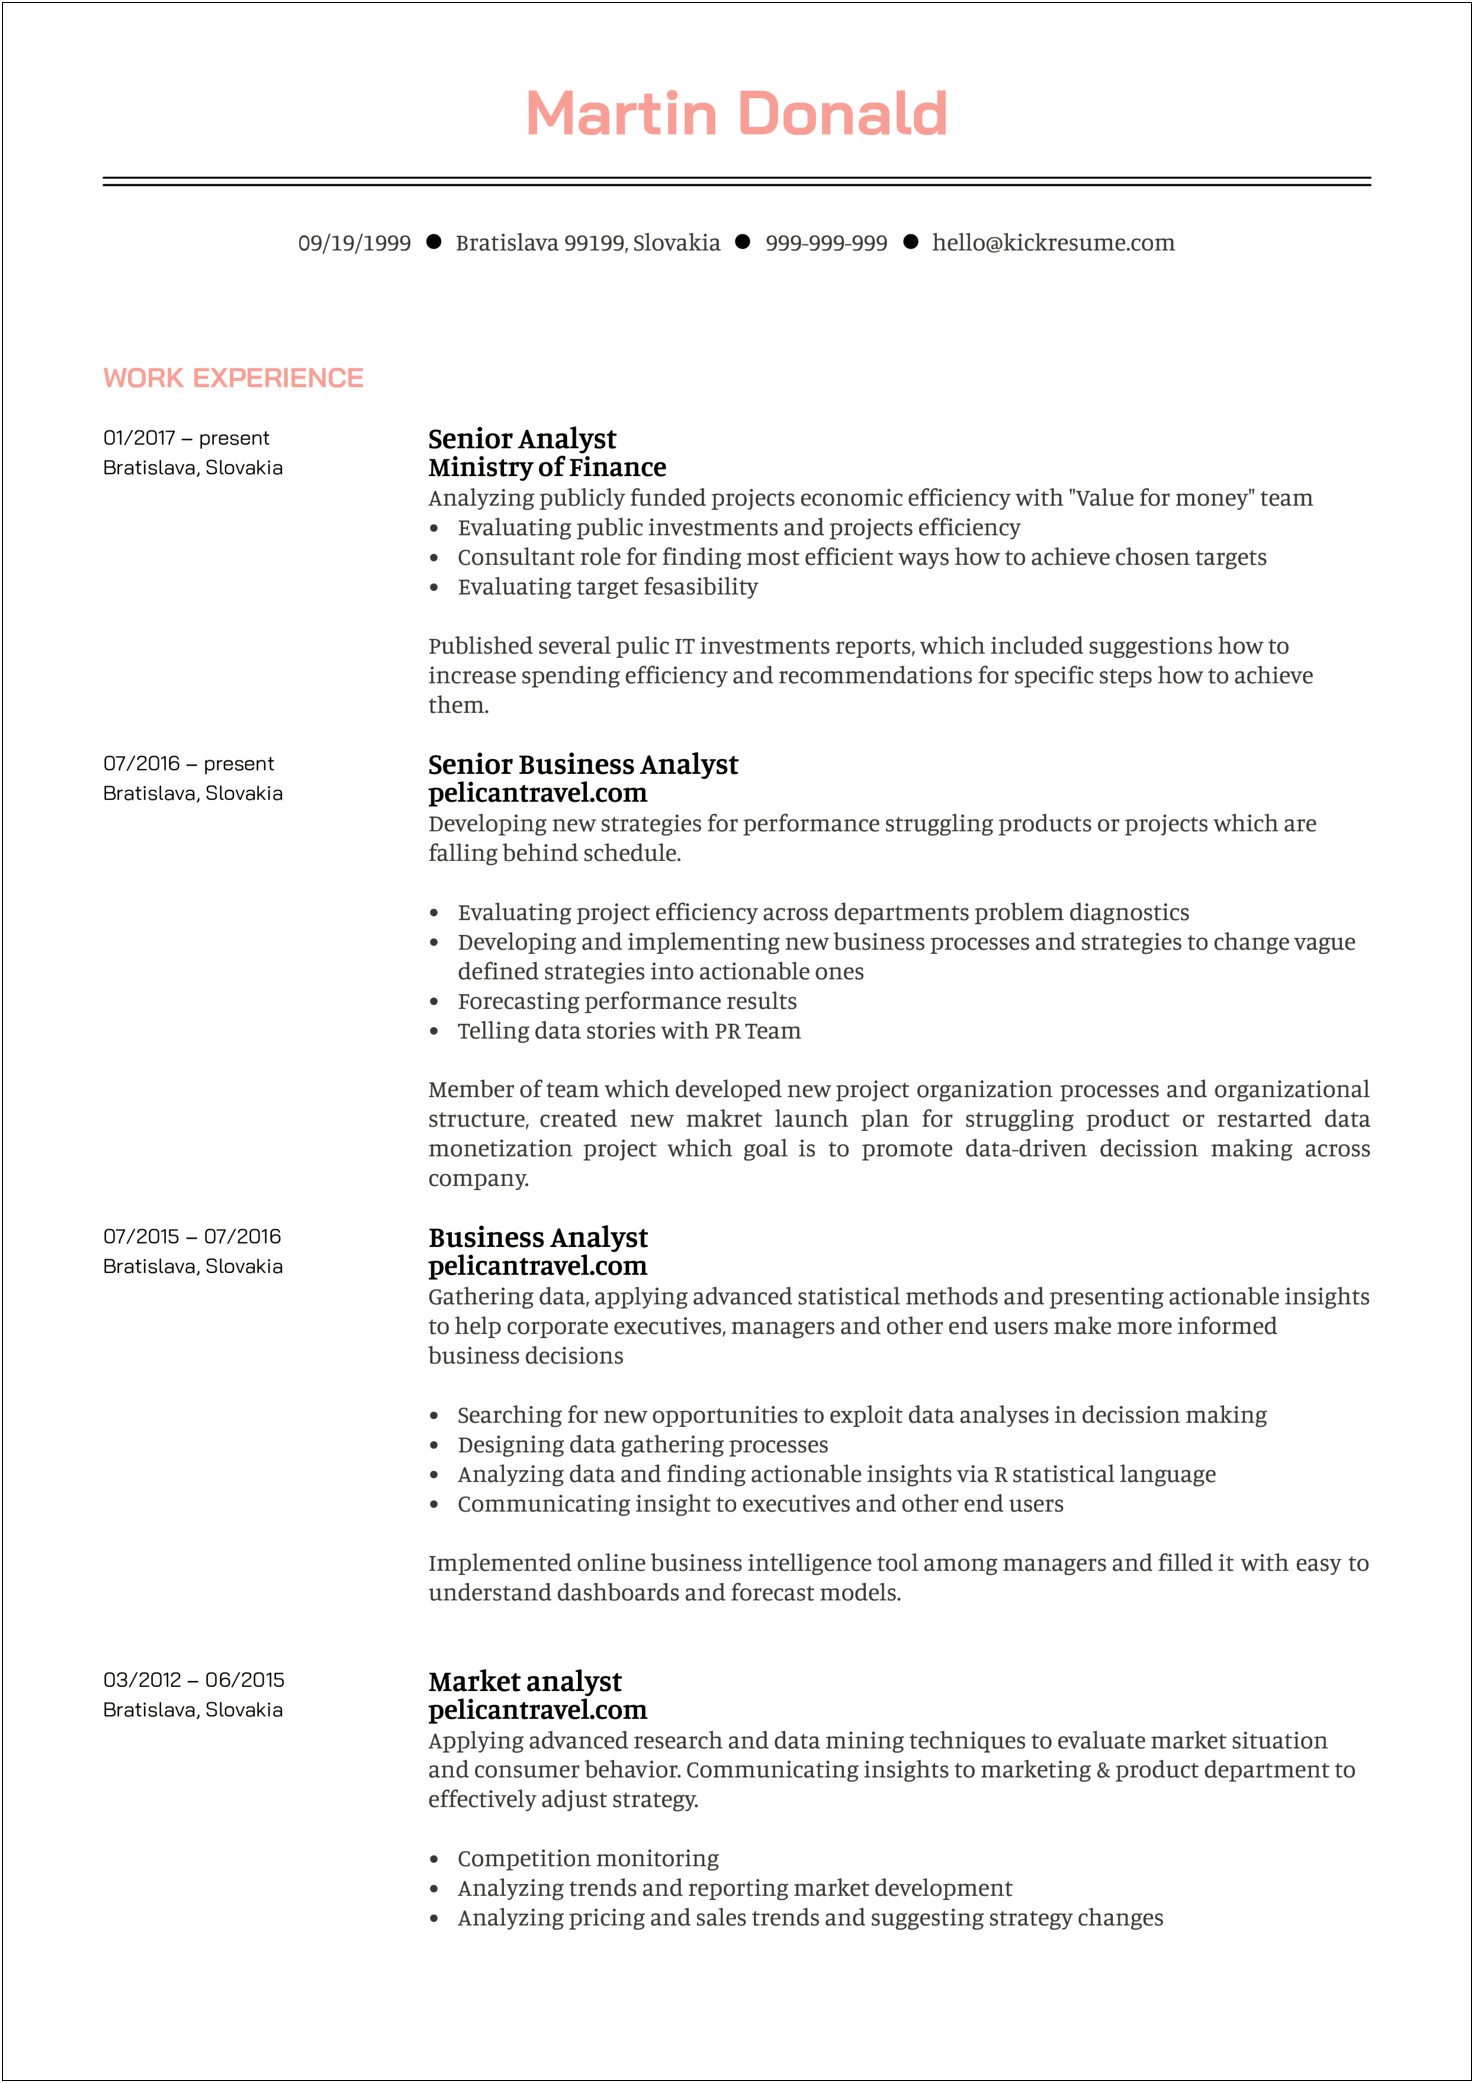 Sample Resume Objective Statements For Business Analyst